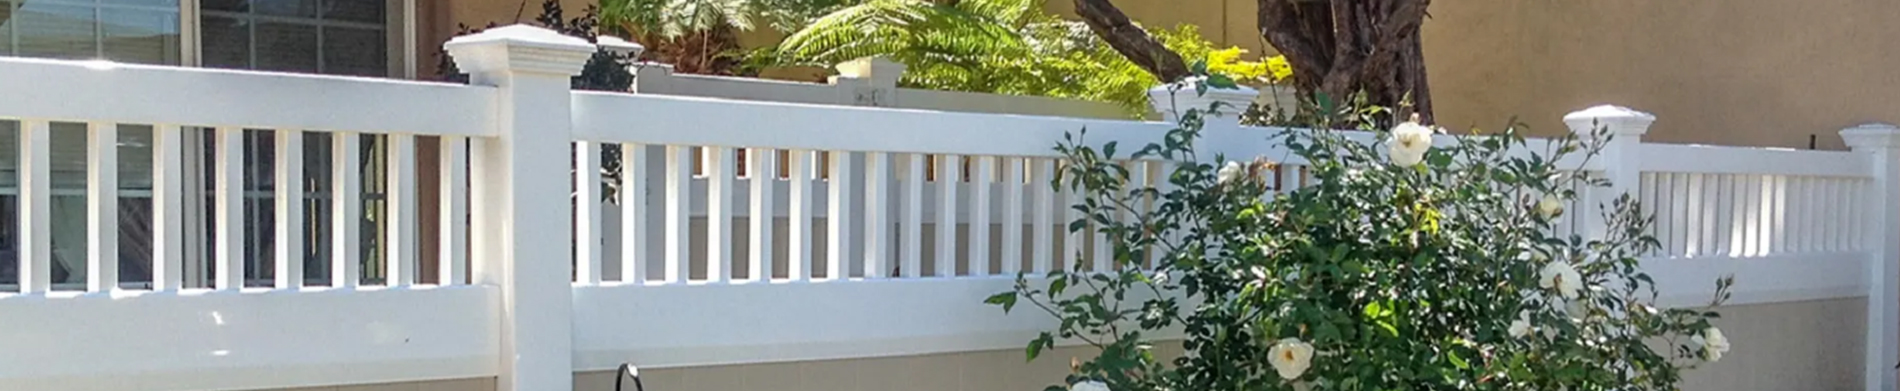 How to Select a Fencing for Your Home